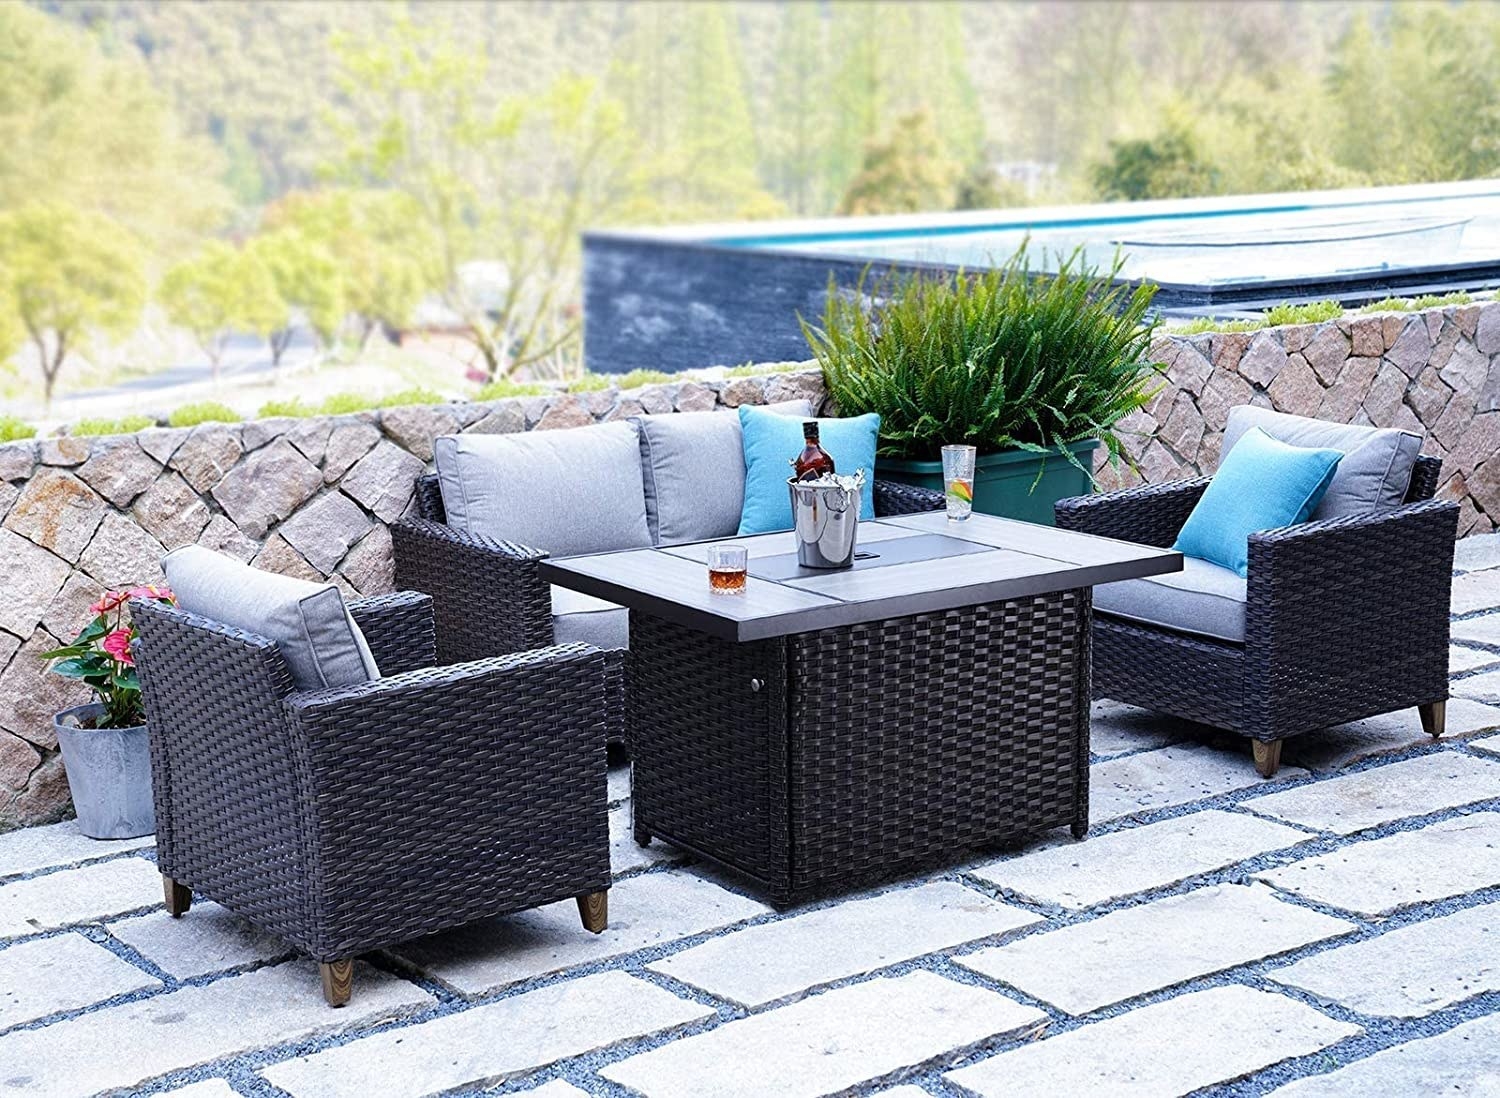 PatioPost 5 Piece Outdoor Patio Wicker Rattan Bar Set with Glass Top Table and Four Cushions Bar Stools,Outdoor Furniture Set for Lawn Backyards Gardens,Dining Set or Poolside-Brown 